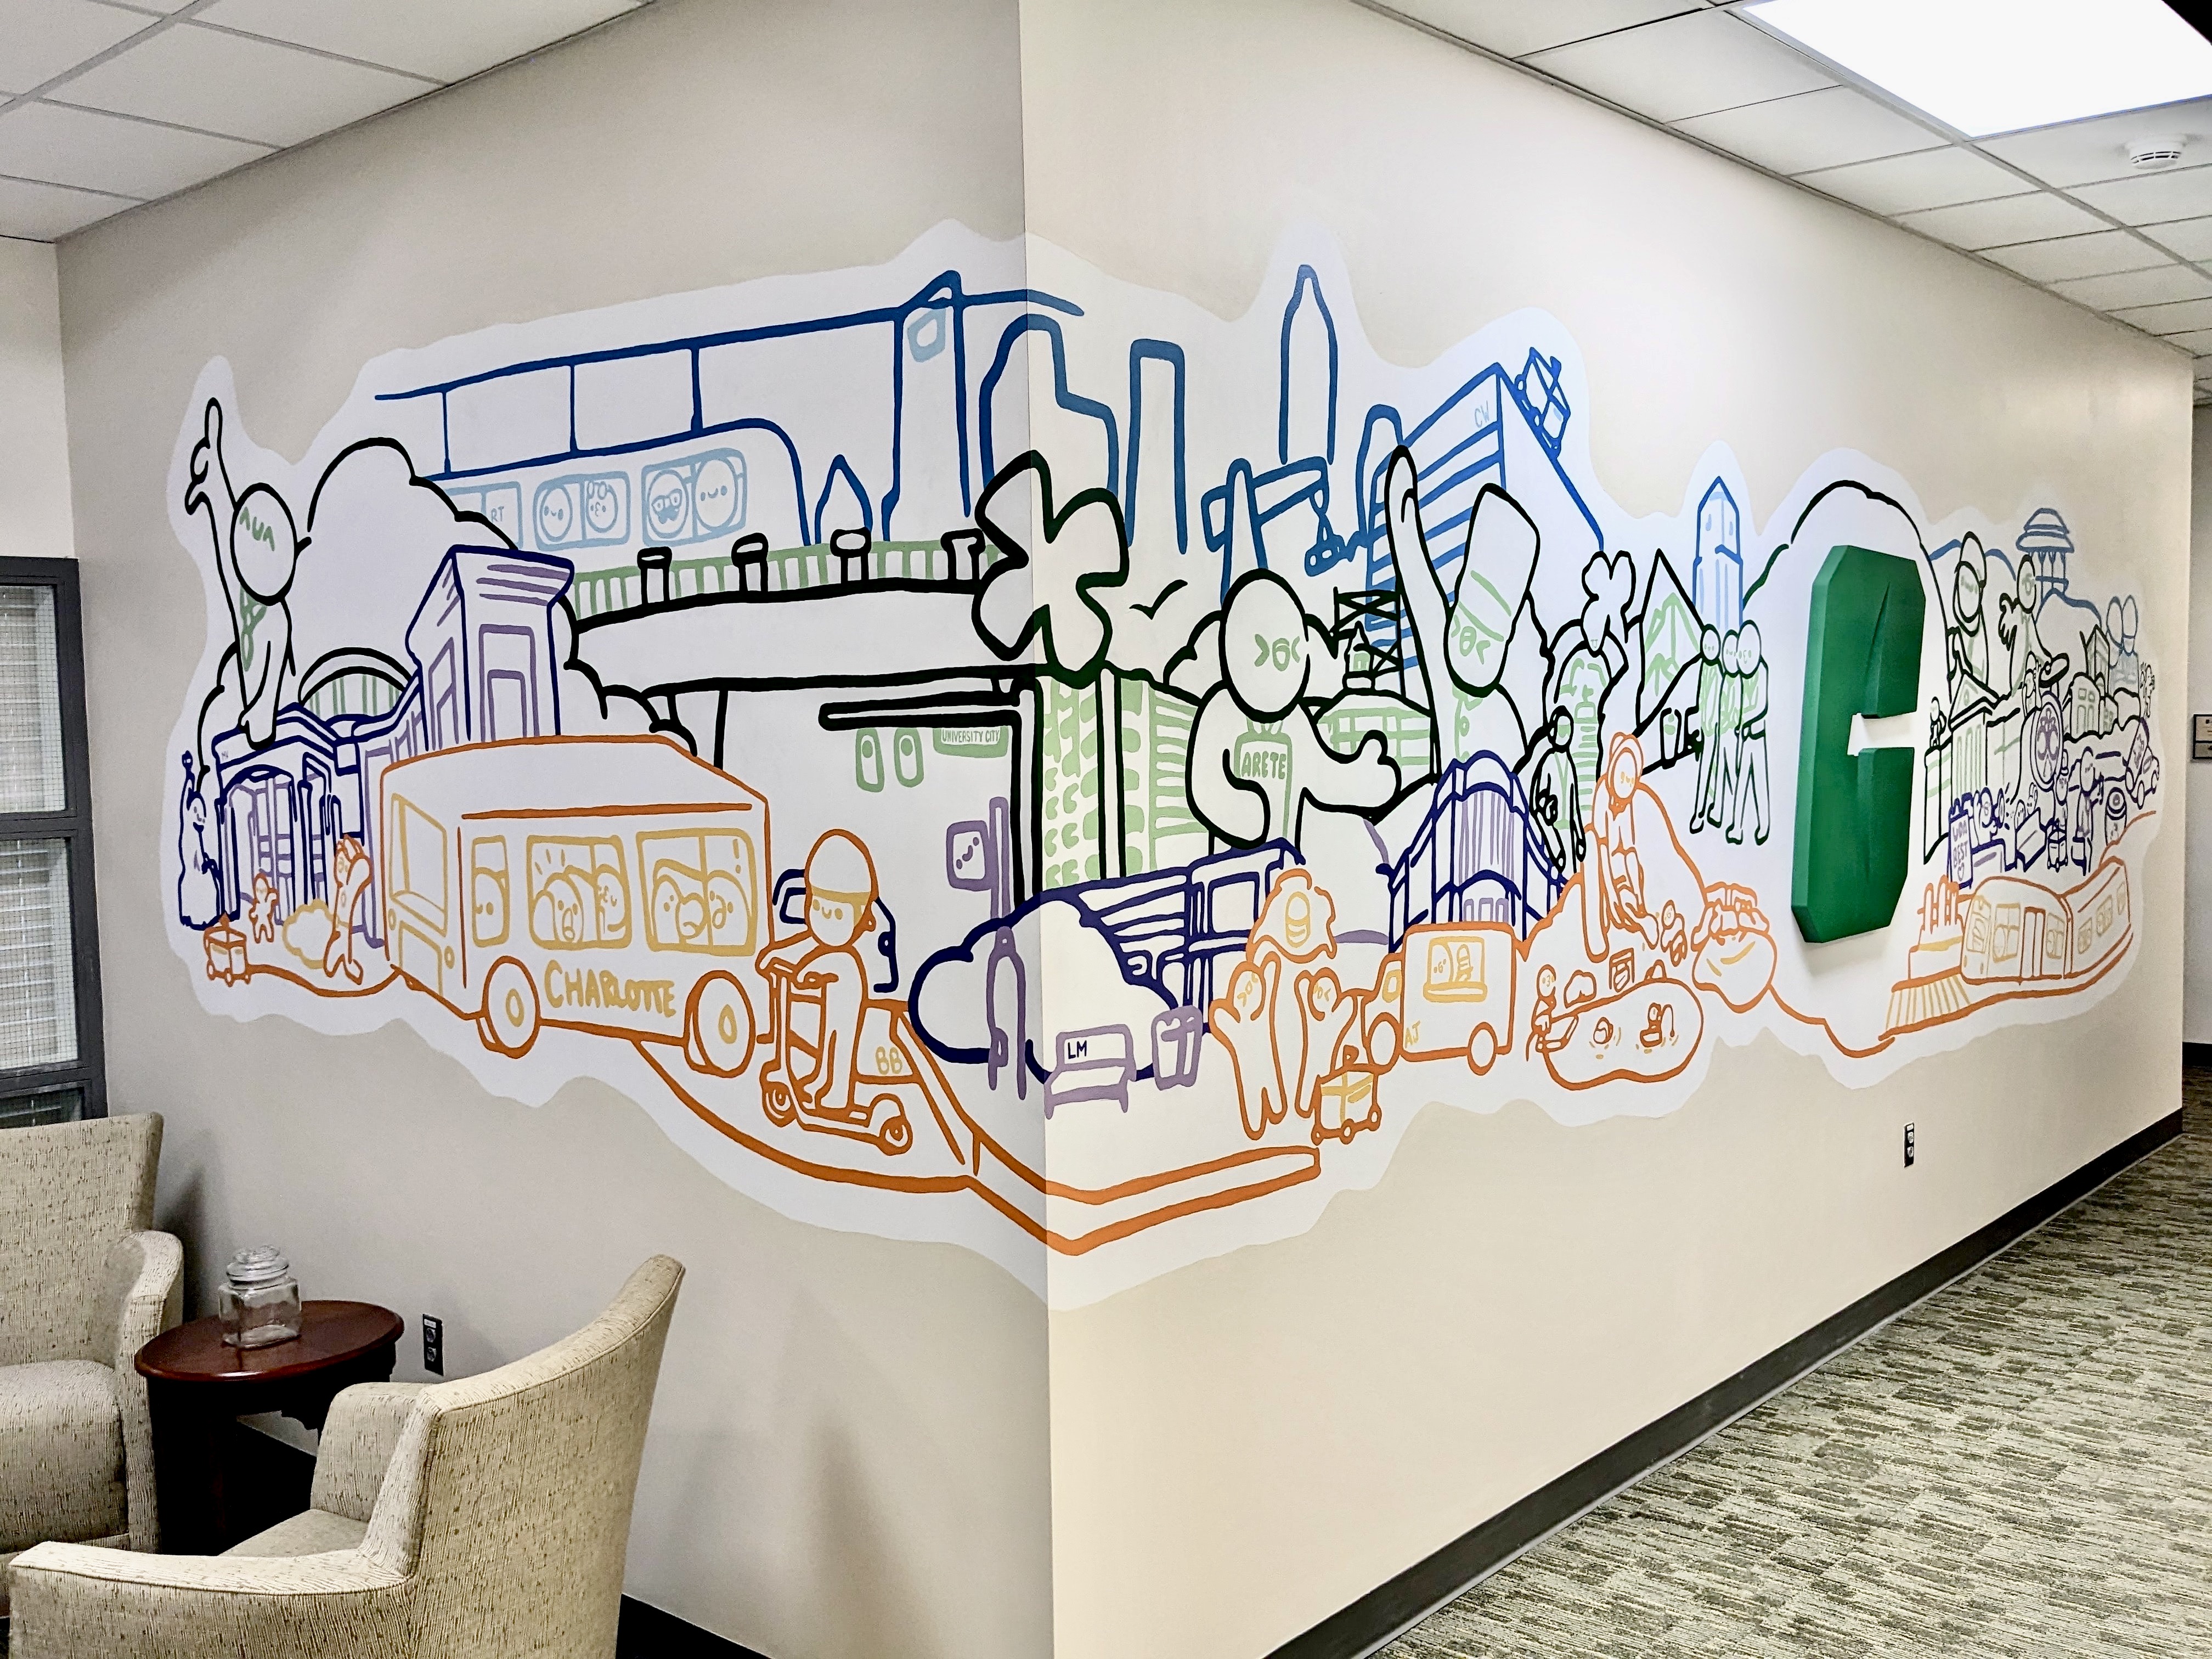 Business Affairs mural created by graphic design students